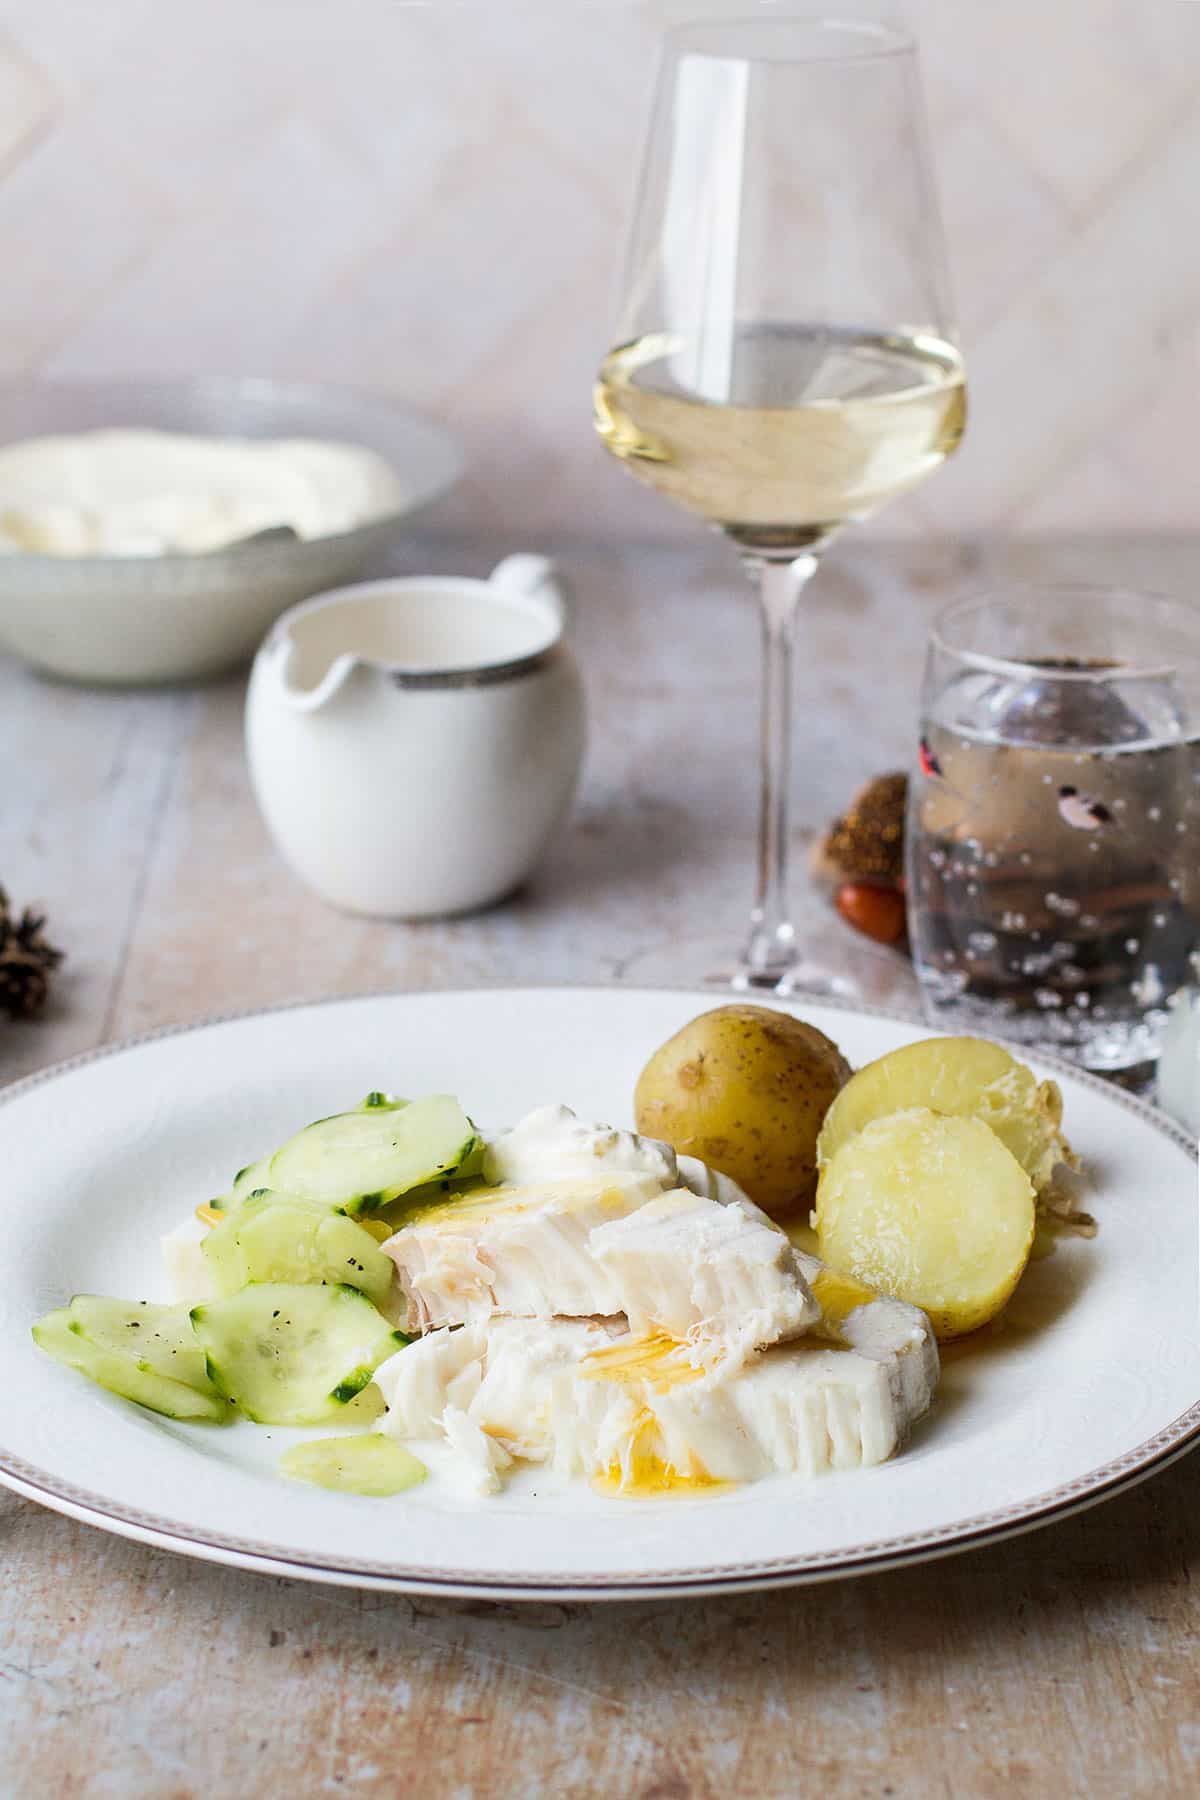 Poached halibut, cucumber salad and whipped sour cream.